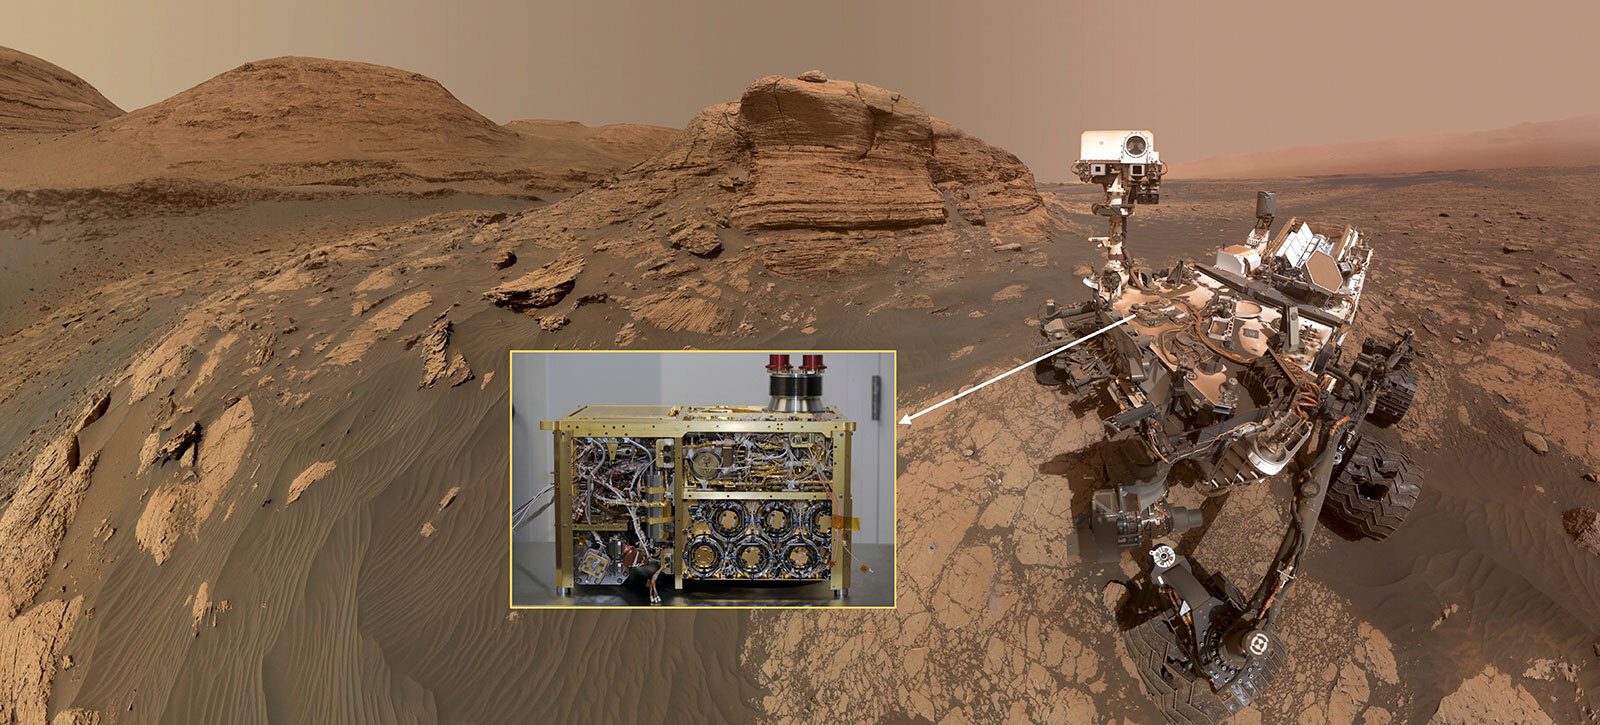 10 astonishing discoveries made by the curiosity rover on mars